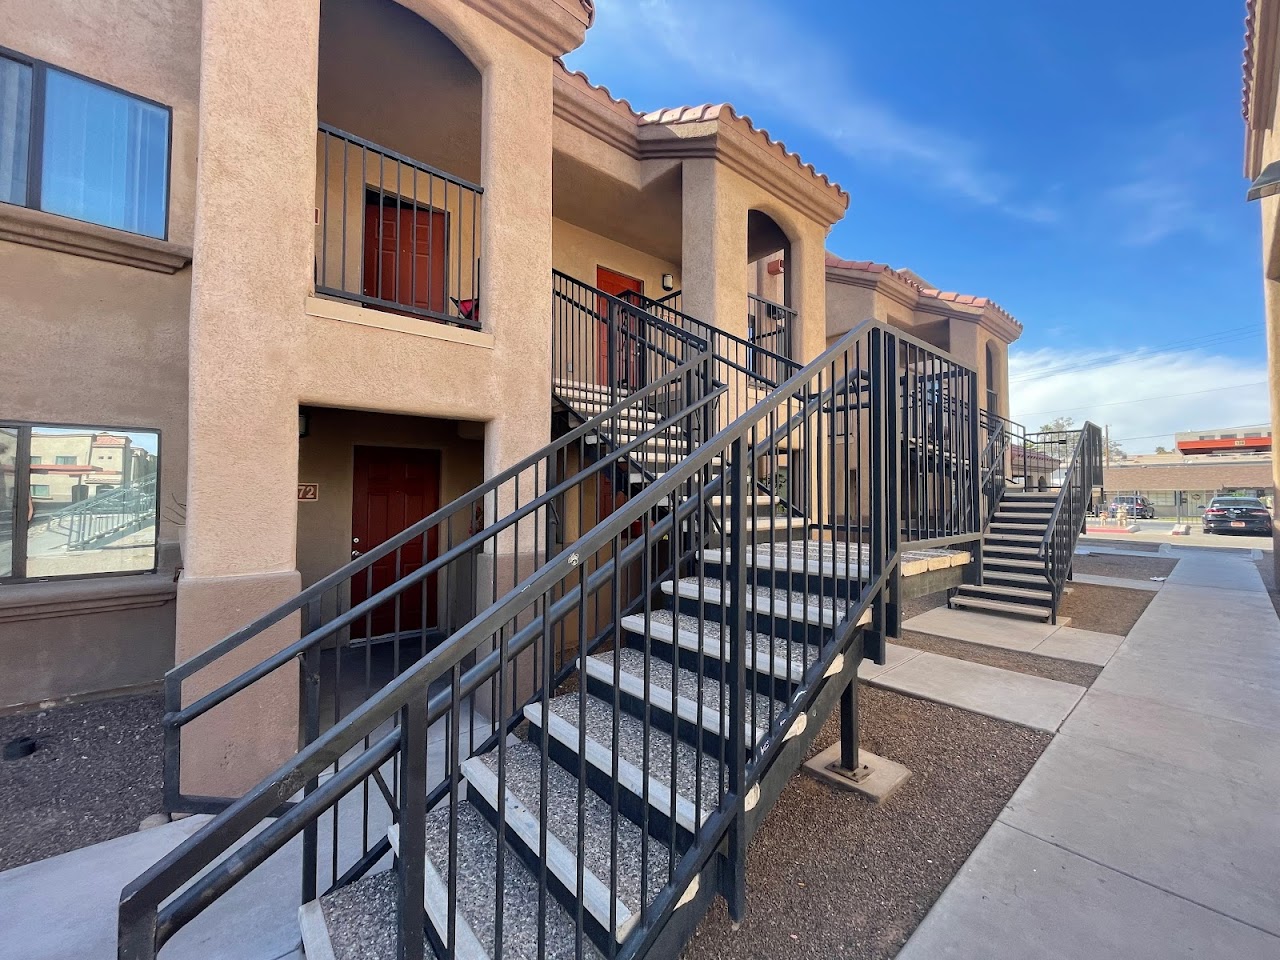 Photo of TEMPLE SQUARE TOWNHOMES. Affordable housing located at 324 S HORNE MESA, AZ 85204